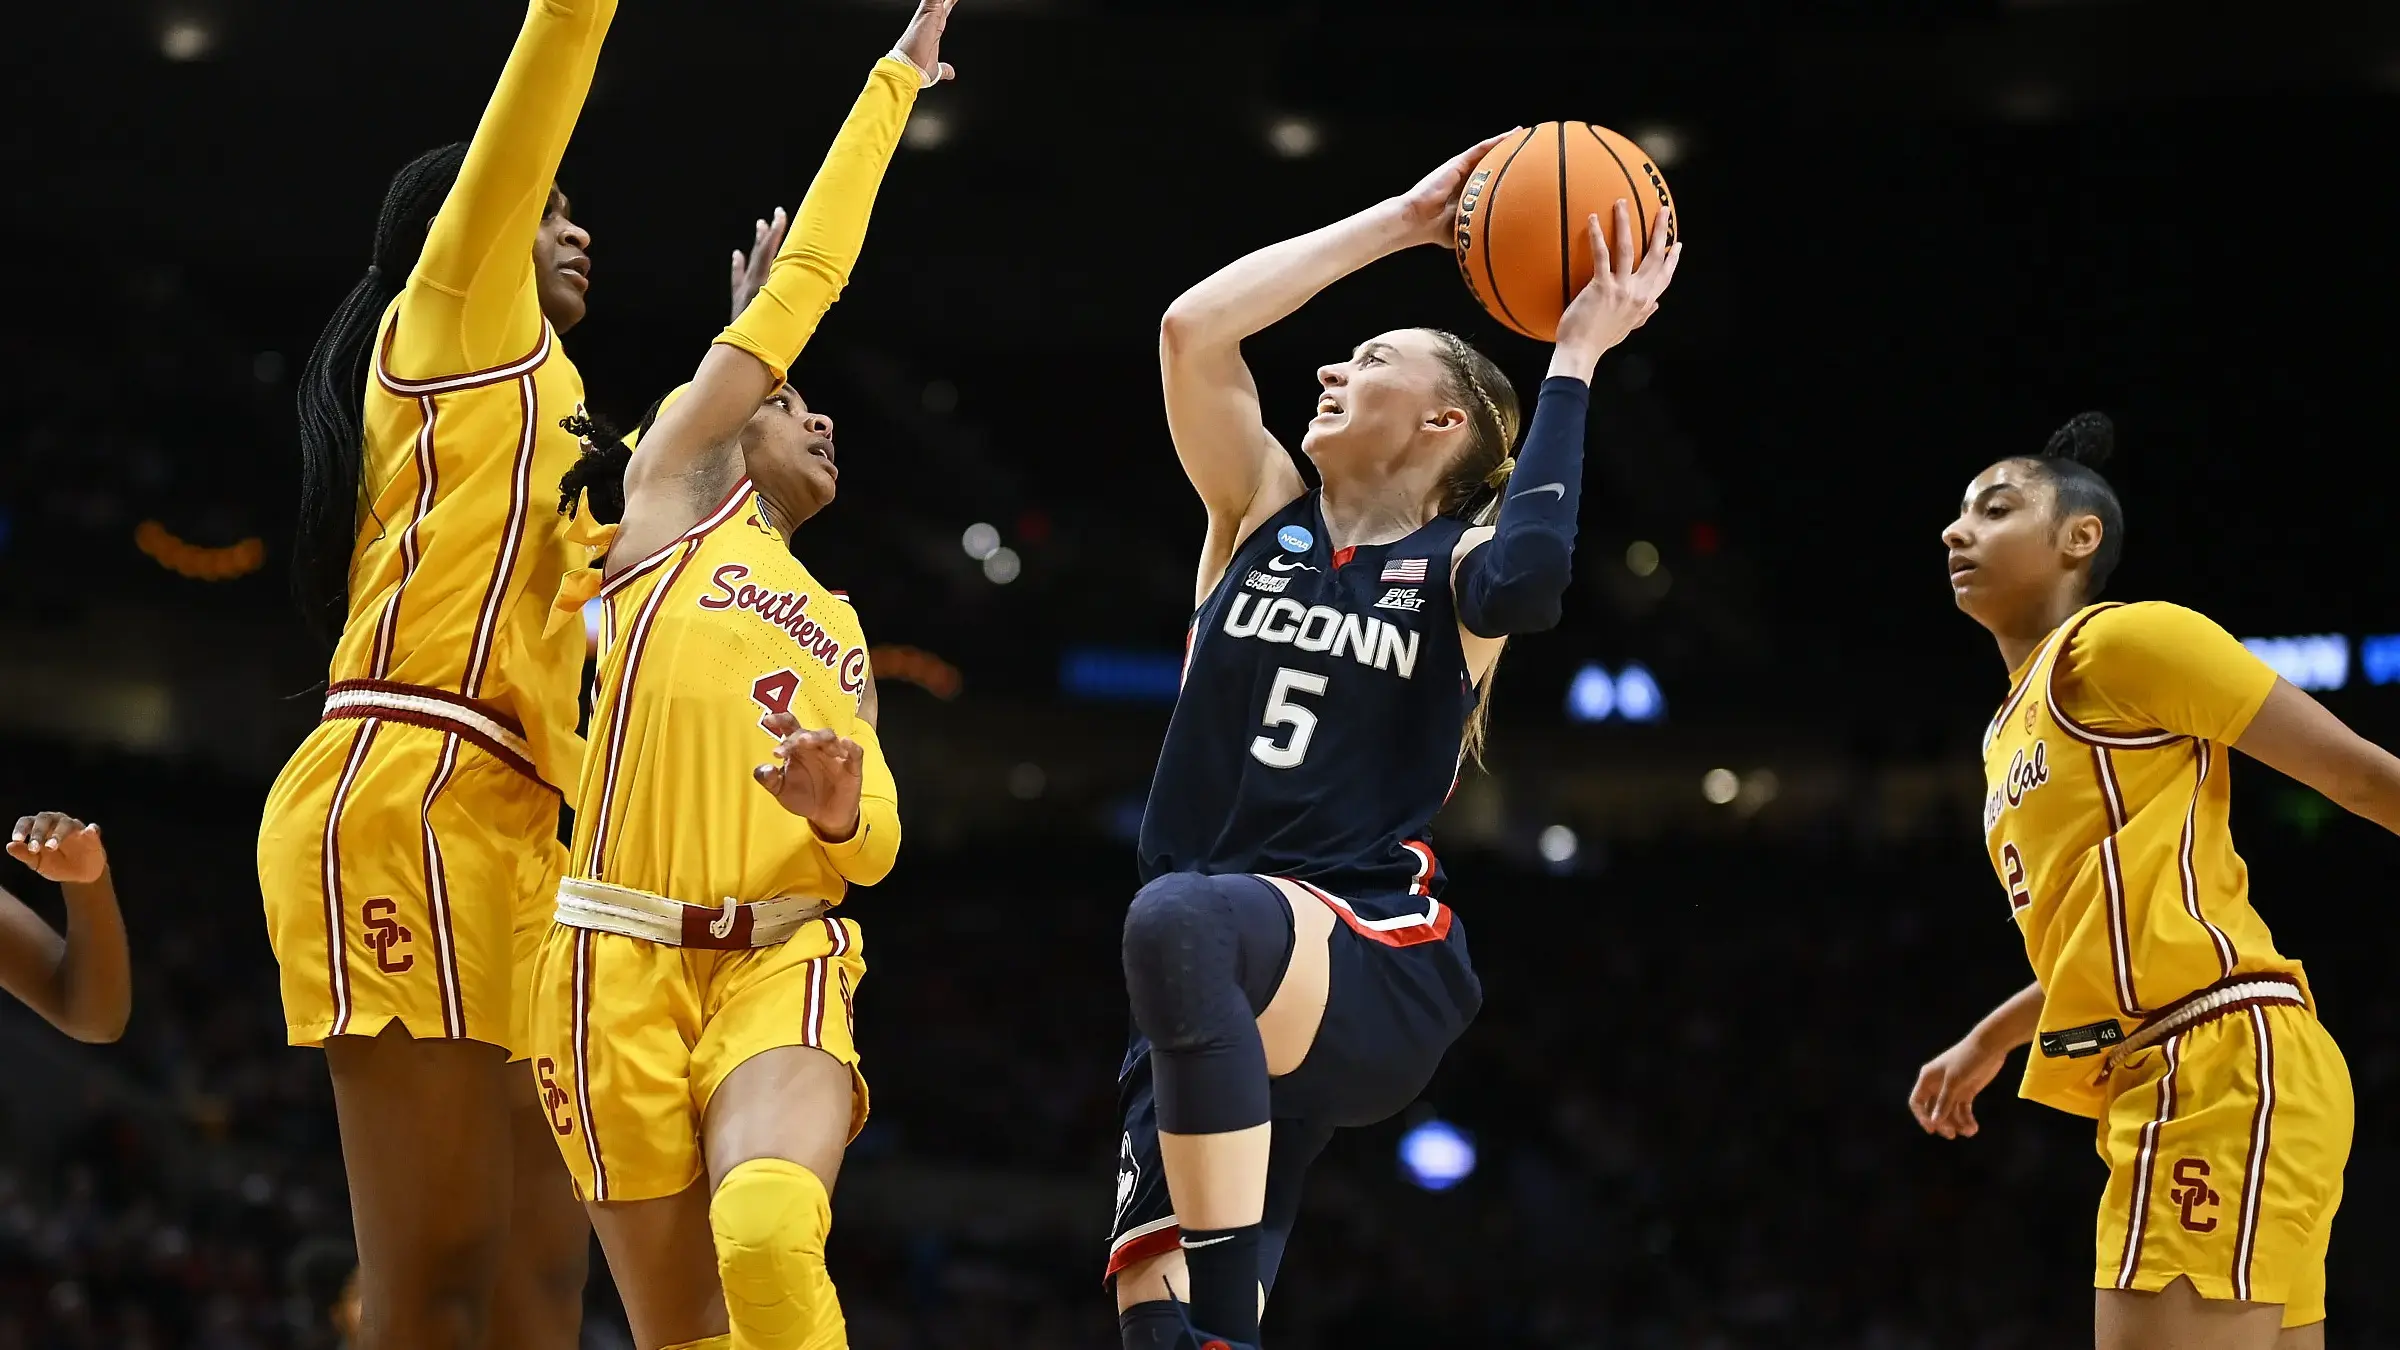 UConn Huskies guard Paige Bueckers (5) drives to the basket during the first half against USC Trojans guard Kayla Williams (4) and center Clarice Akunwafo (34)in the finals of the Portland Regional of the NCAA Tournament at the Moda Center / Troy Wayrynen - USA TODAY Sports